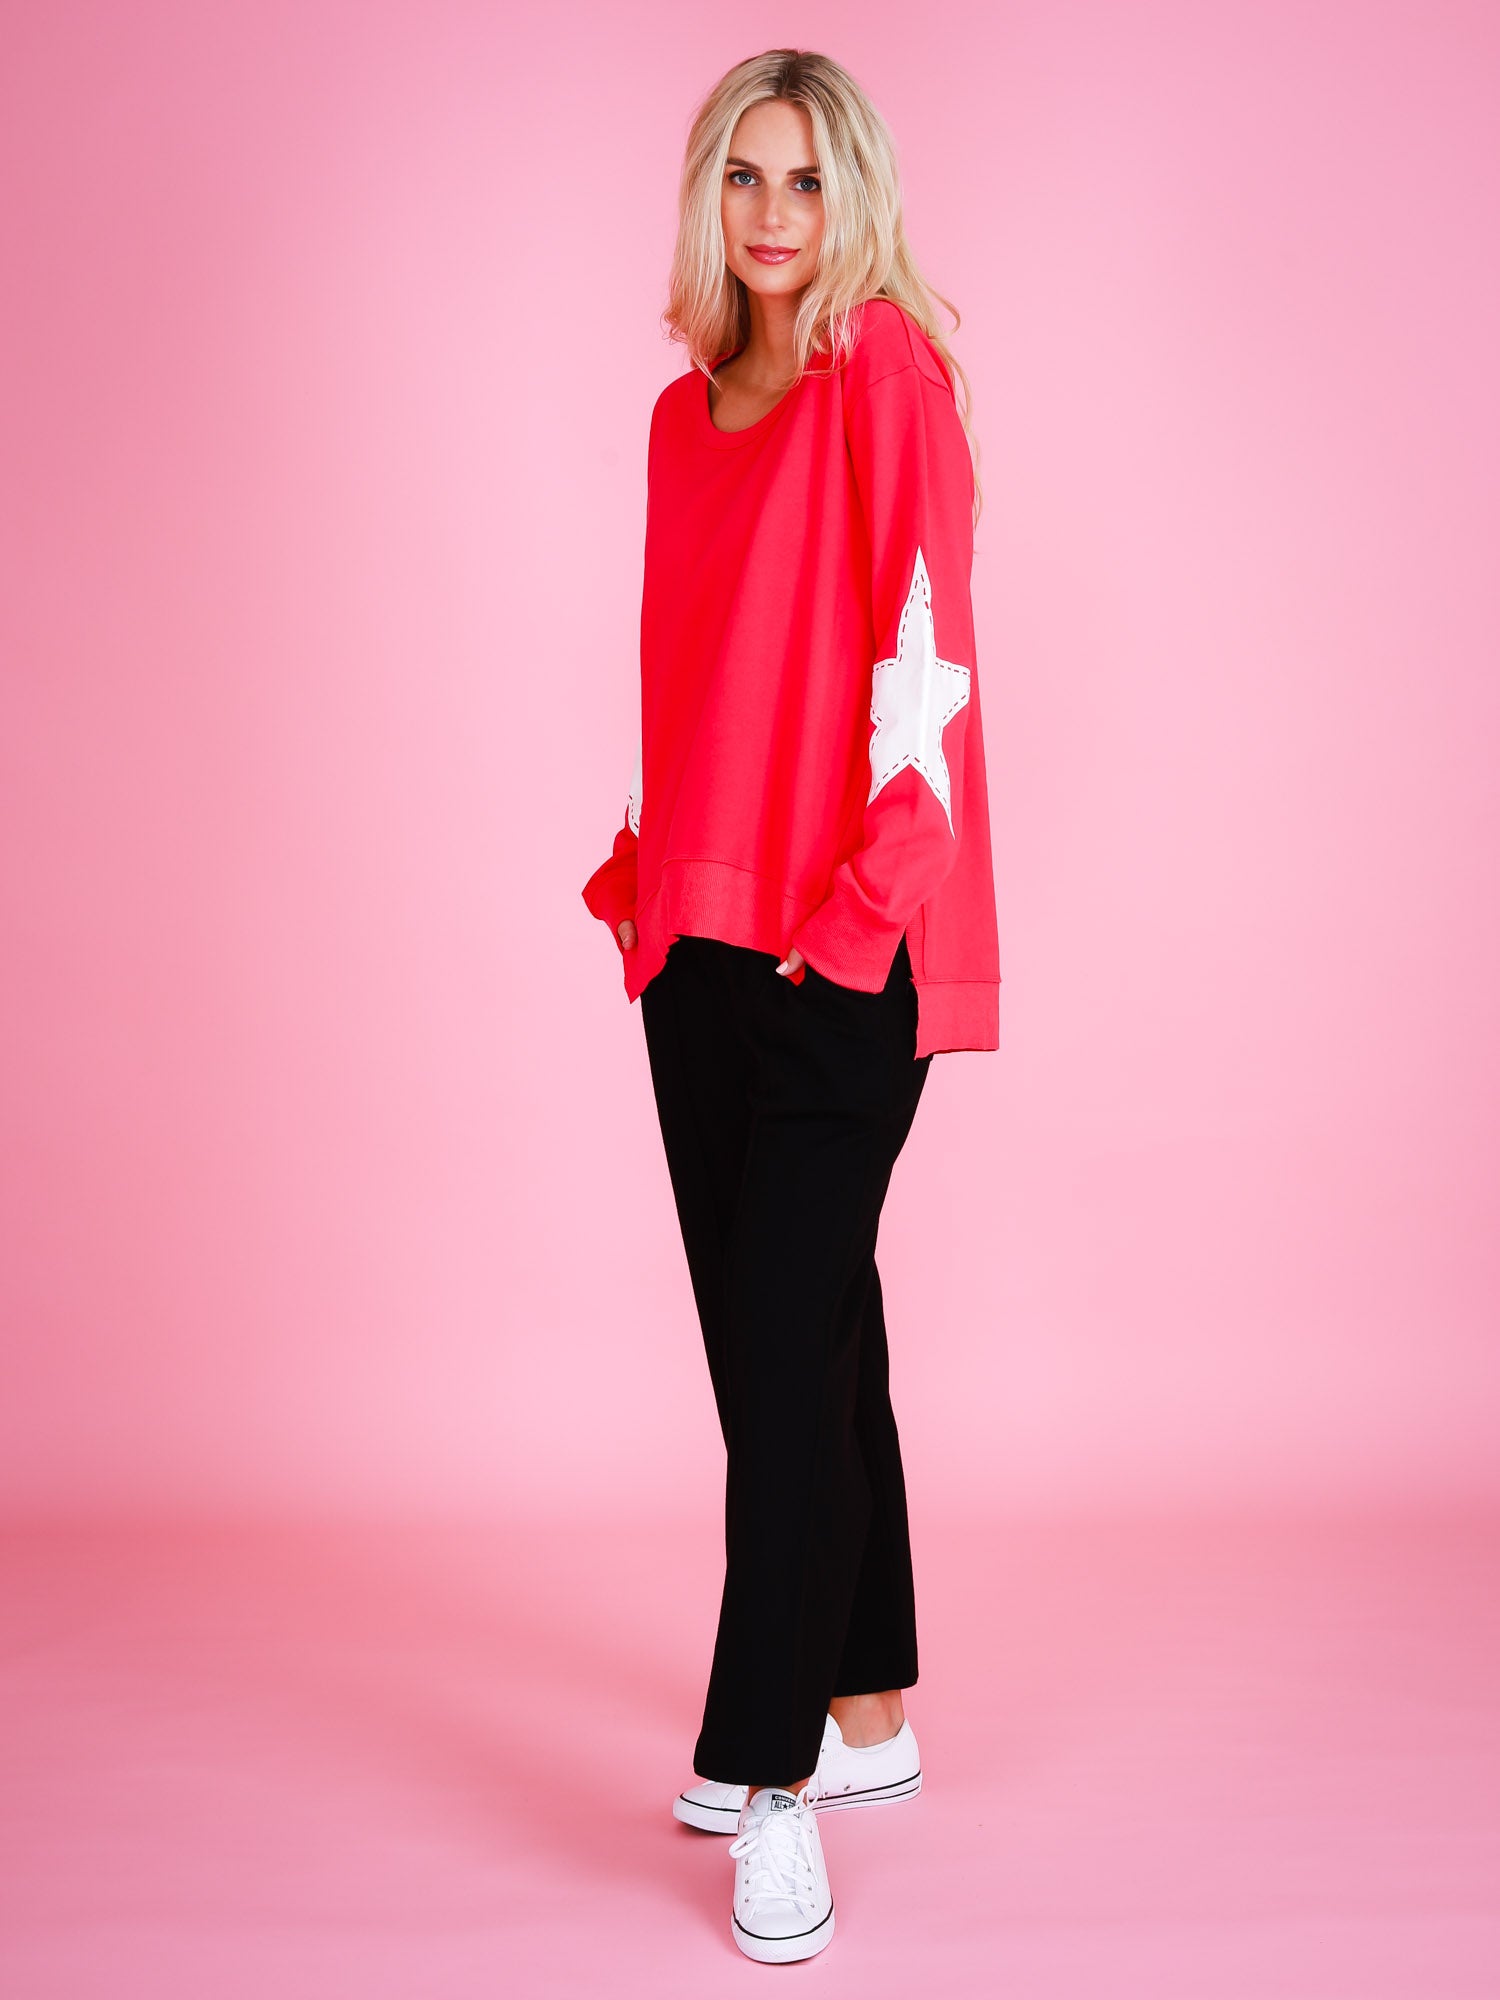 red sweater women #color_pink flash 